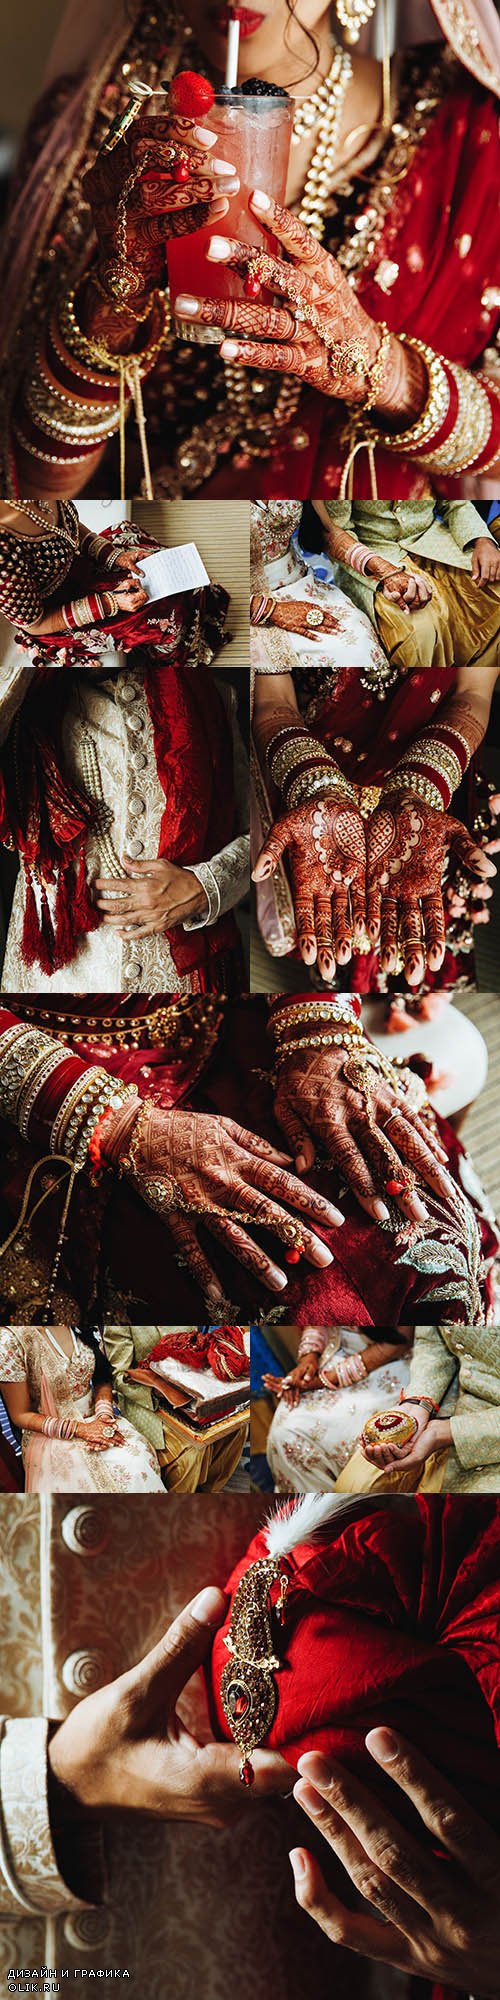 India wedding tradition ceremony and clothing items 2